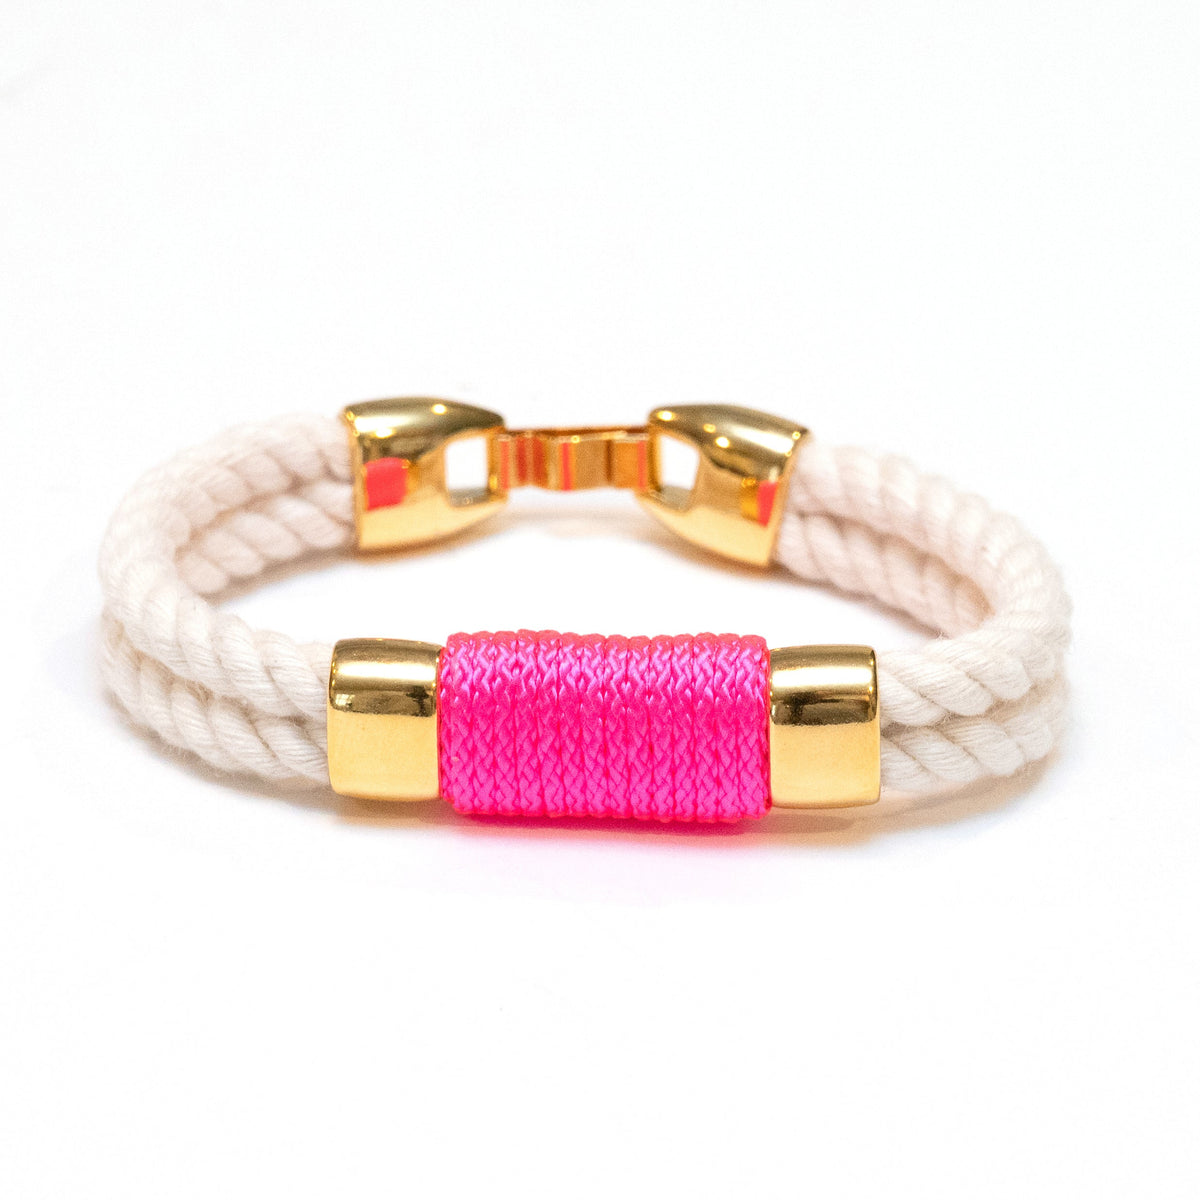 Tremont - Ivory/Neon Pink/Gold